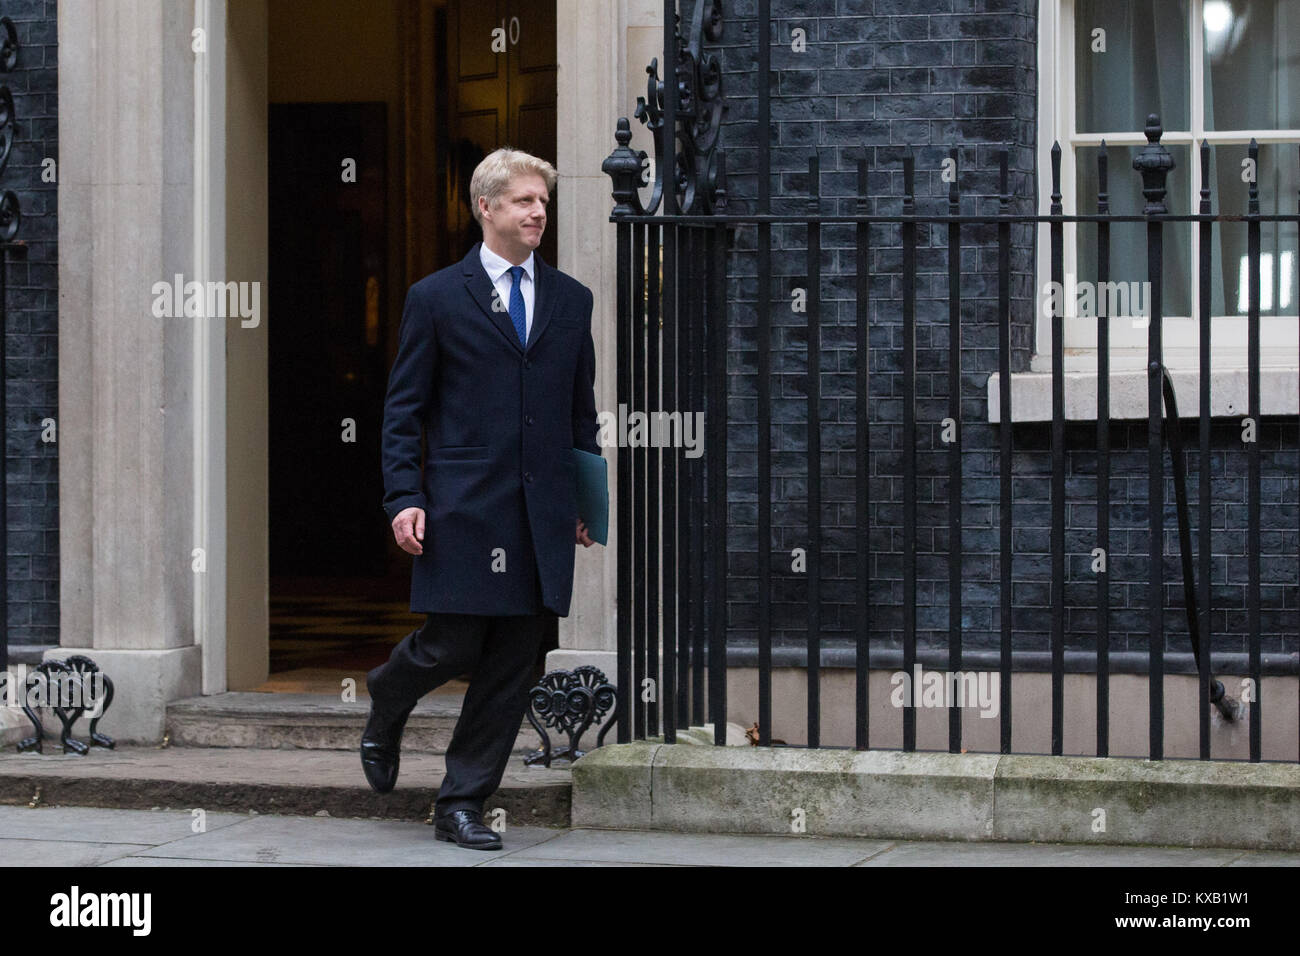 London, UK. 9th January, 2018. Jo Johnson MP leaves 10 Downing Street after being appointed as Minister of State for at the Department for Transport and Minister for London during the reshuffle of junior ministers by Prime Minister Theresa May. Credit: Mark Kerrison/Alamy Live News Stock Photo